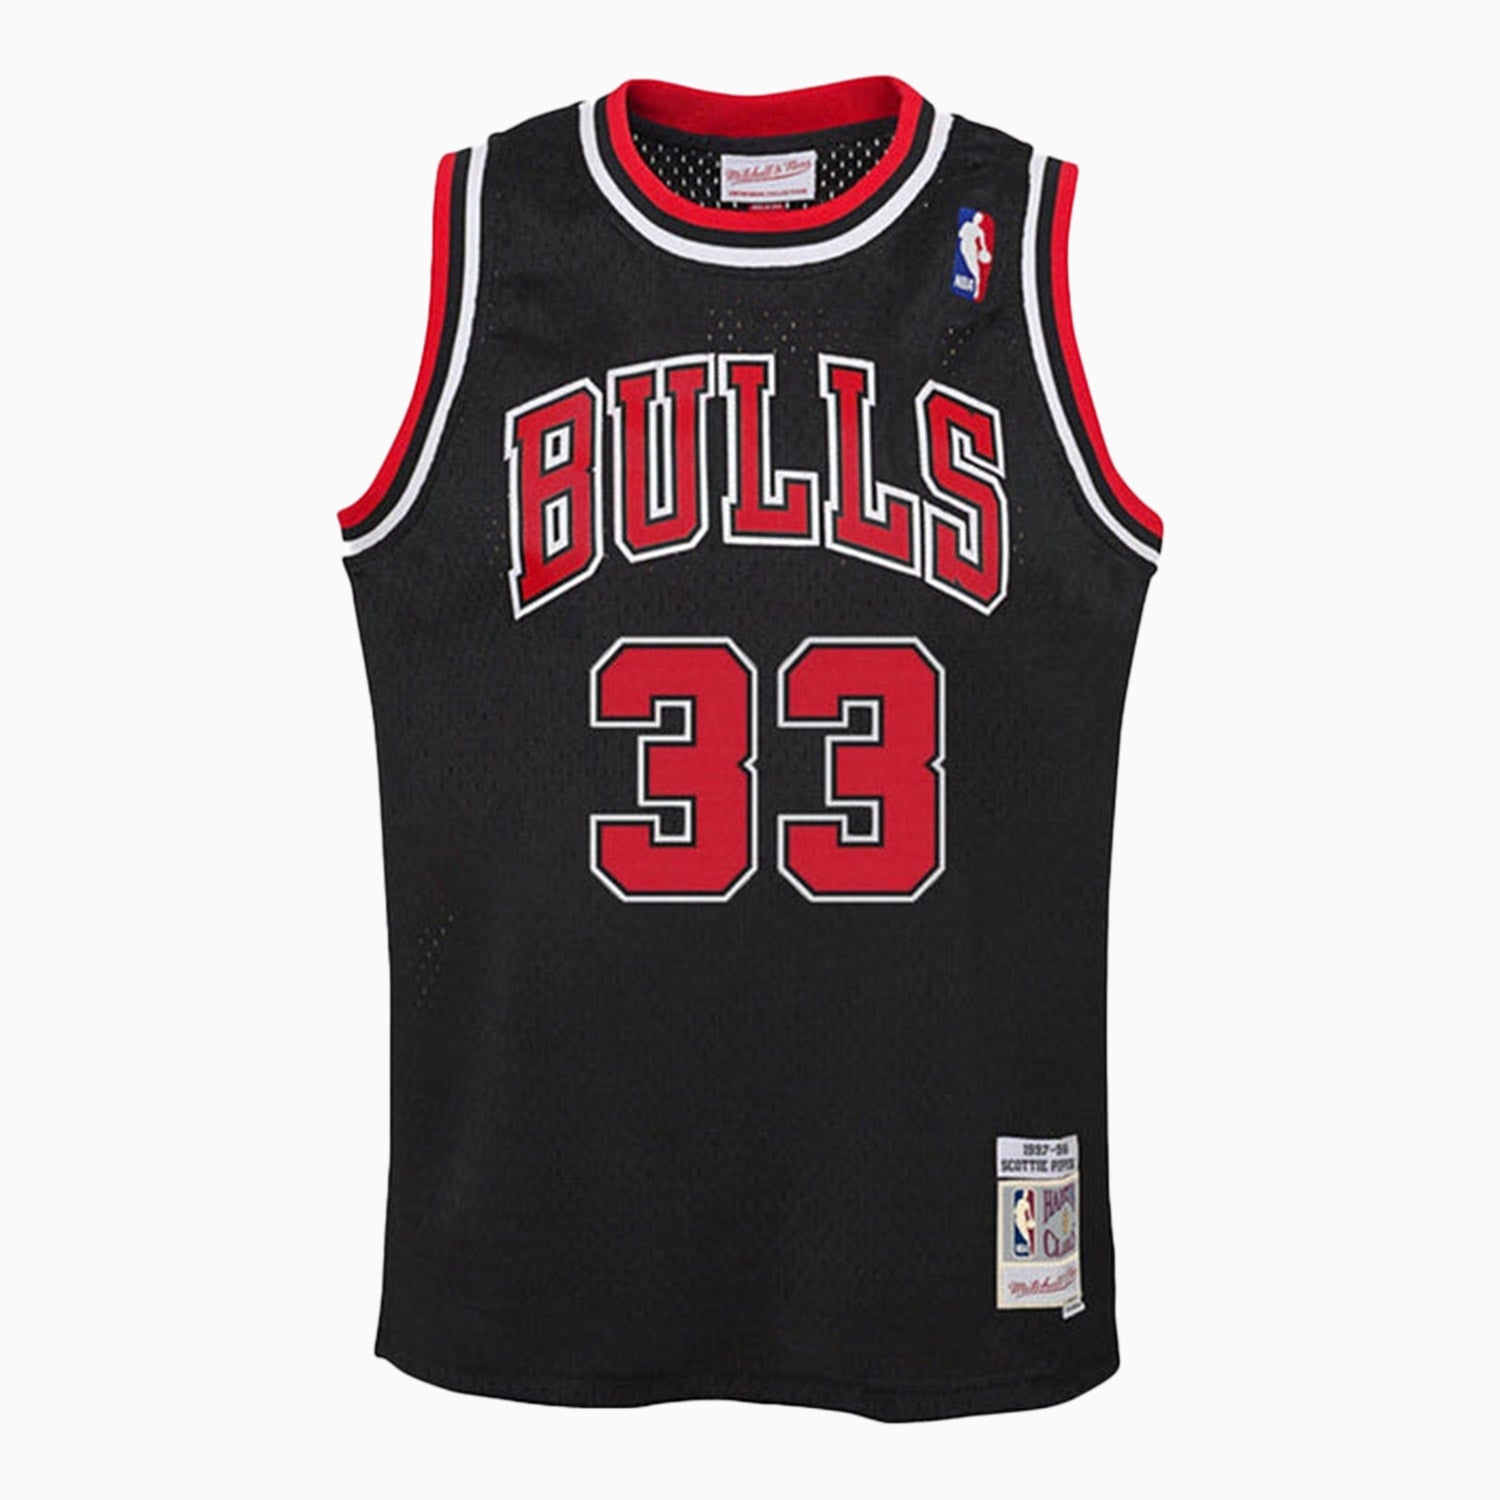 mitchell-and-ness-swingman-scottie-pippen-chicago-bulls-nba-1997-98-jersey-toddlers-9n2t1blt0-bulsp